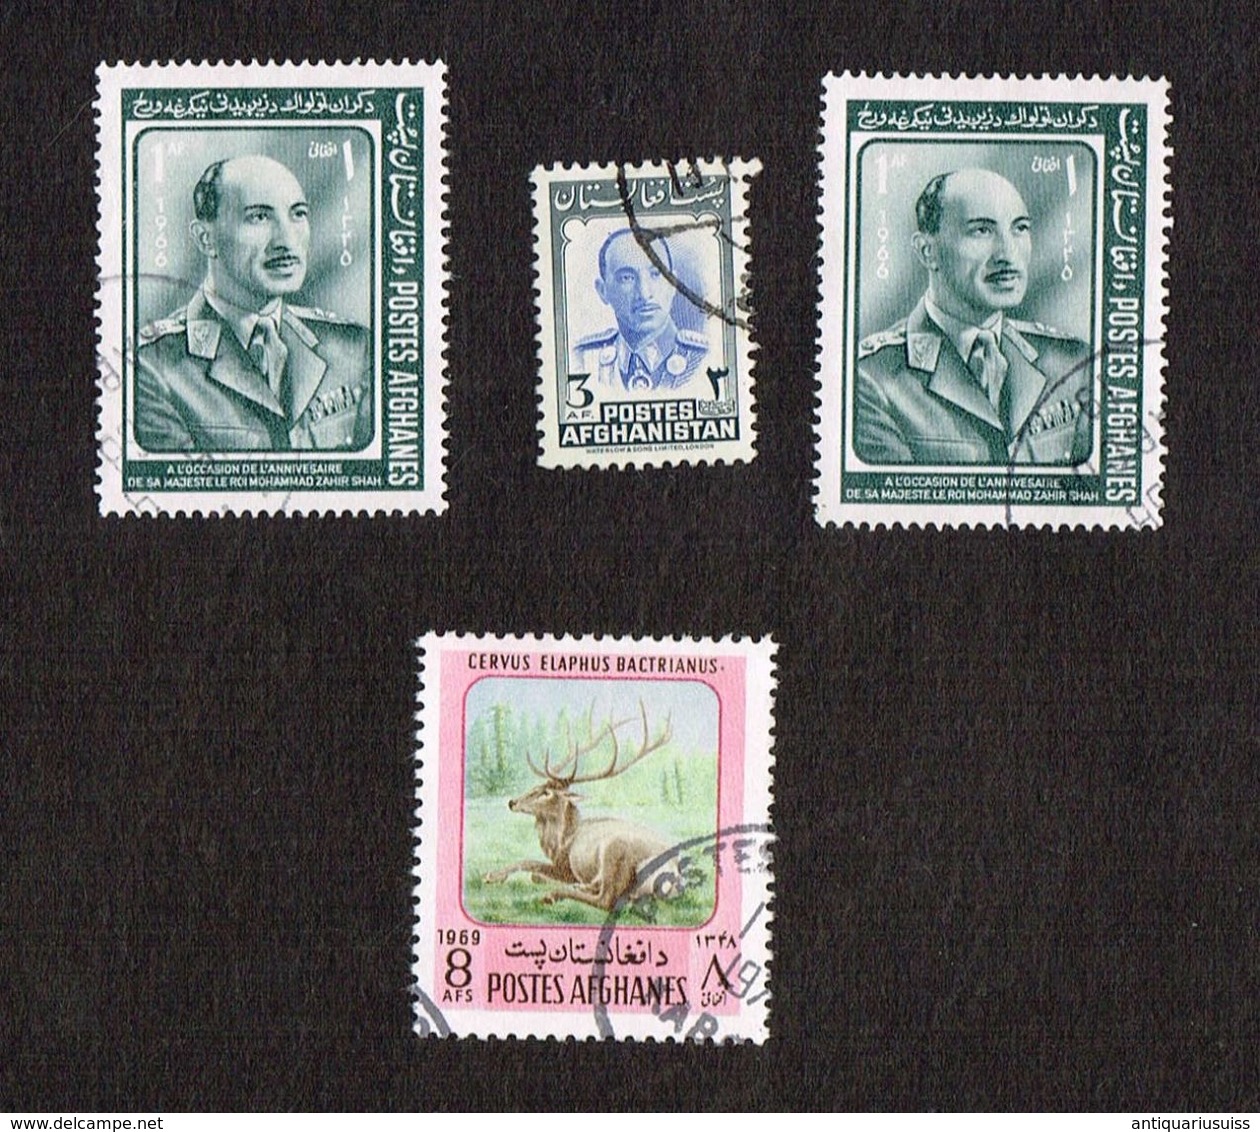 4x Timbres - Postes Afghanistan  - Postes Afghanes - Afghanistan